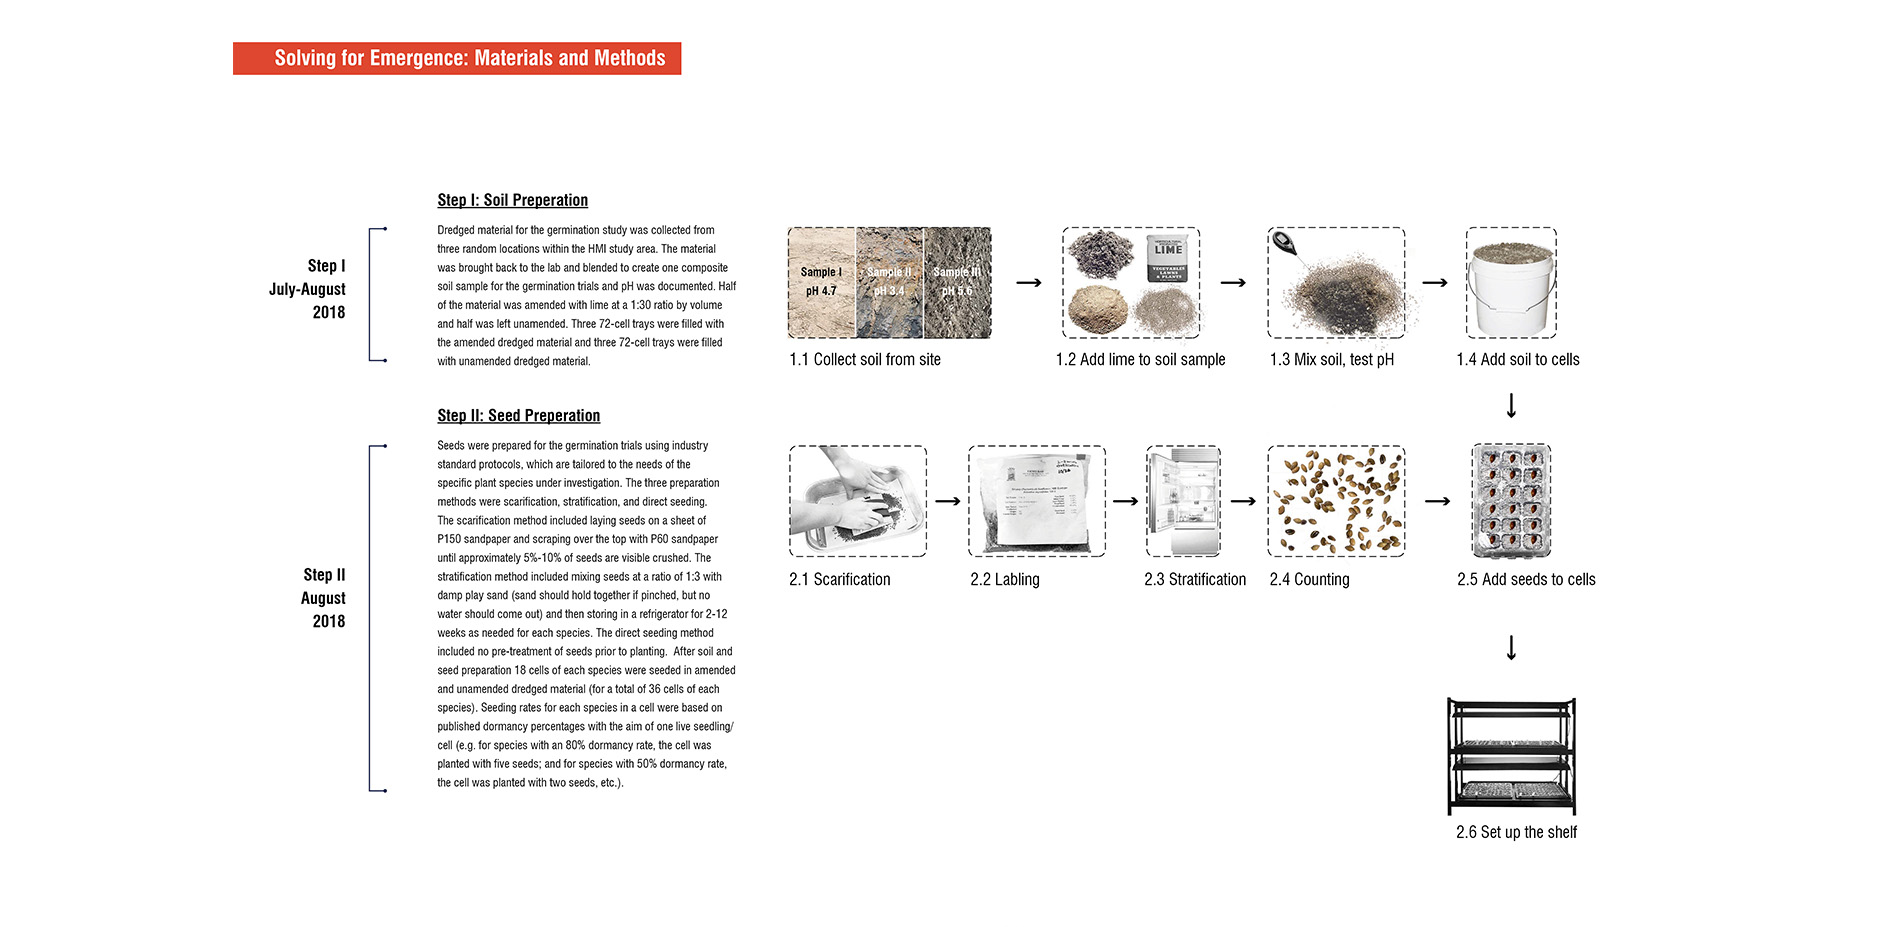 Solving for Emergence: Materials and Methods